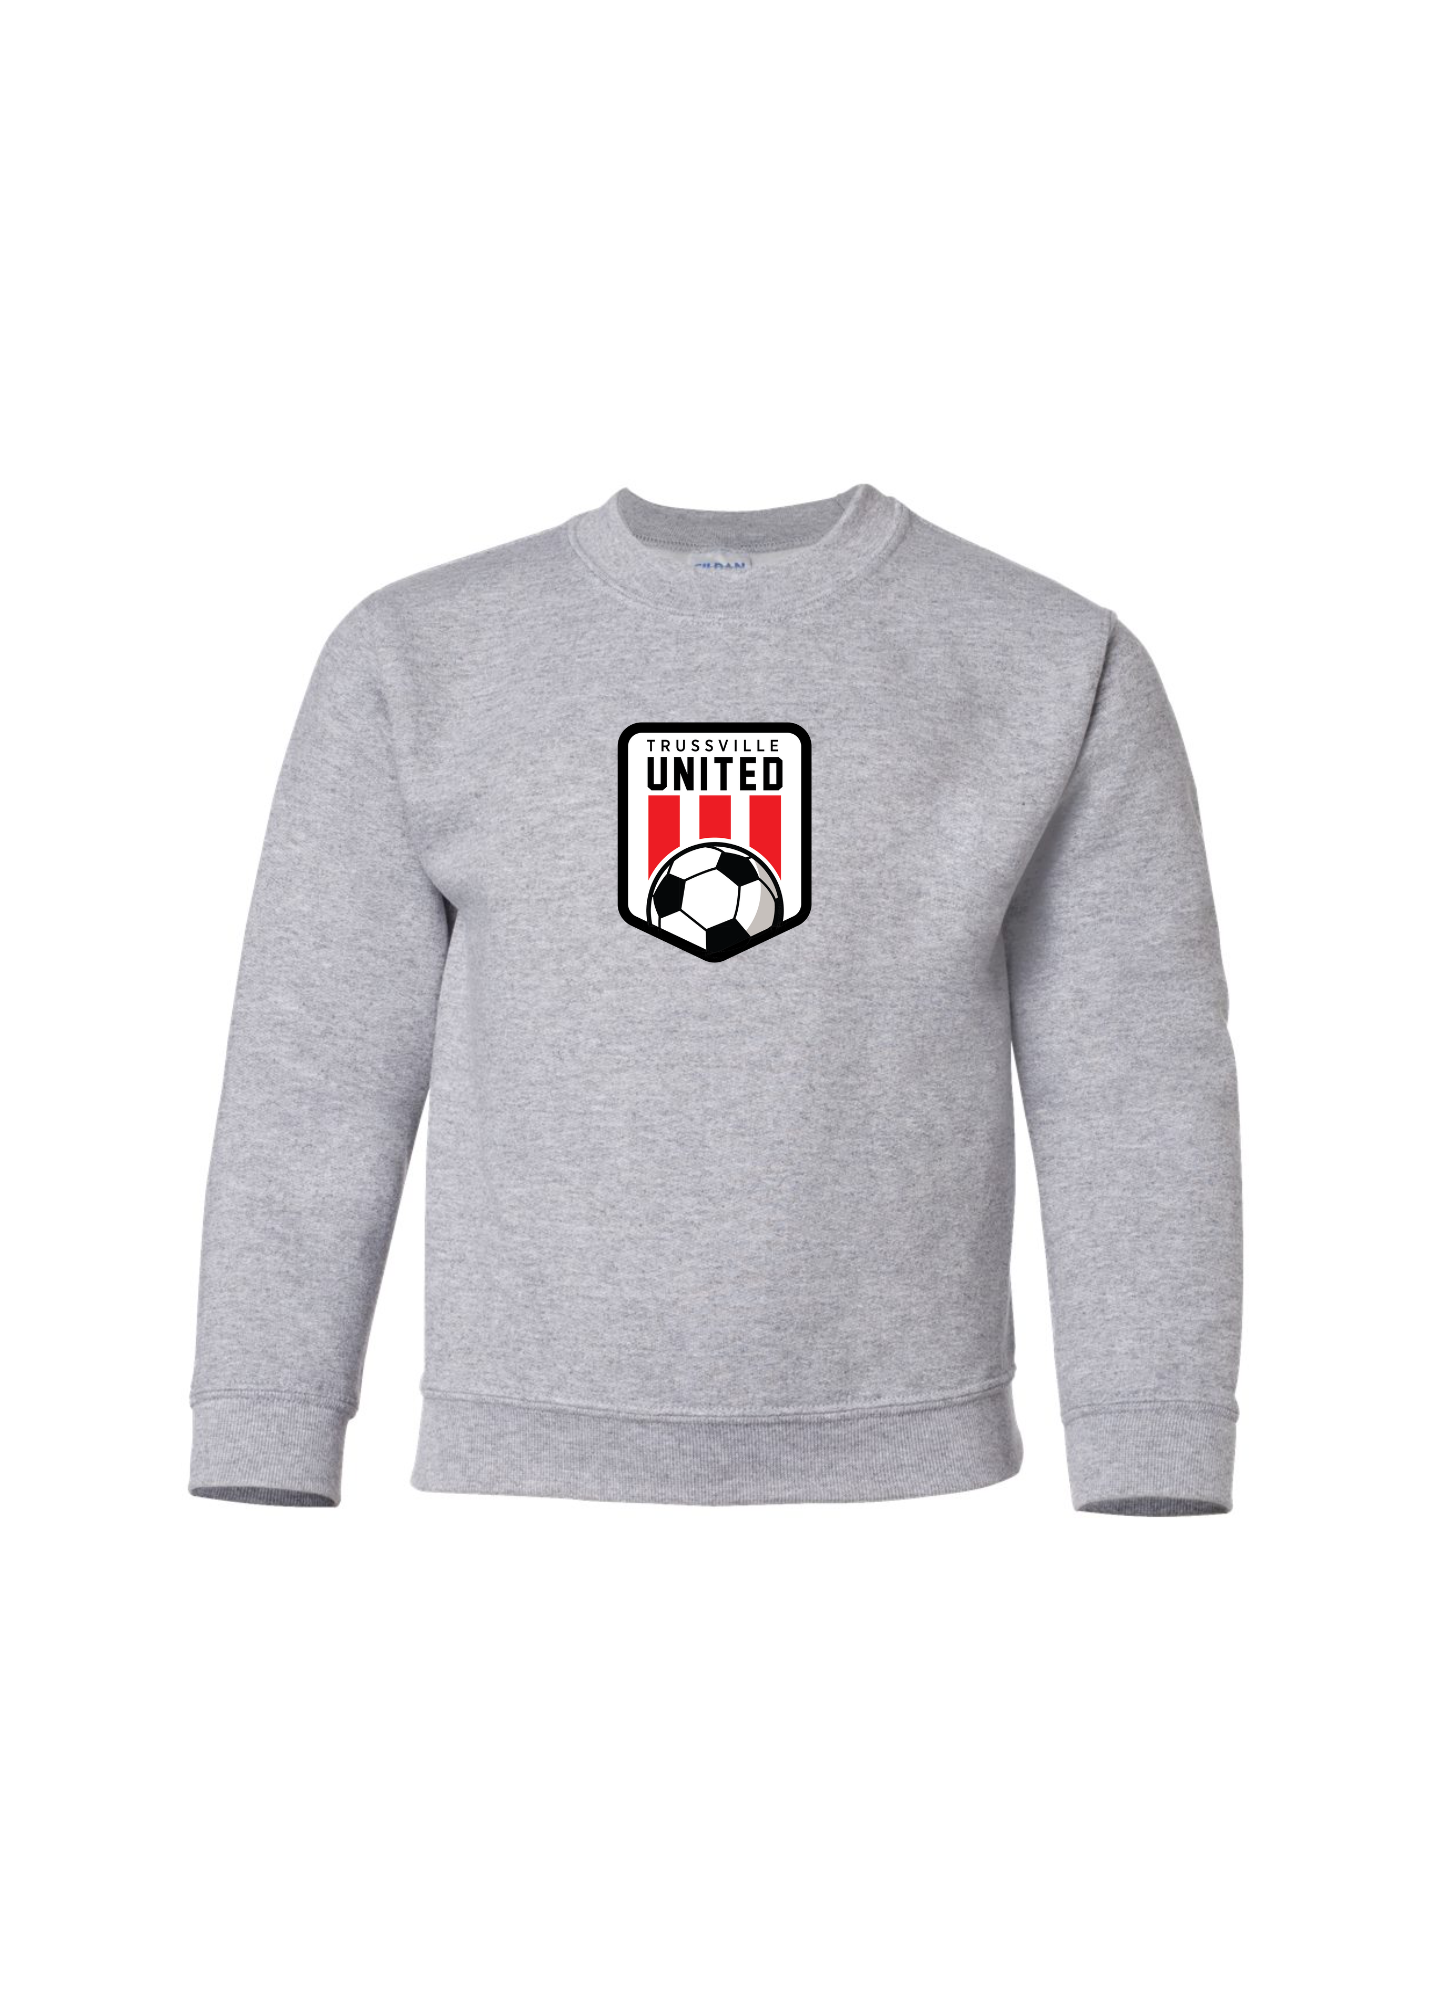 Trussville United | Kids Crewneck-Kids Crewneck-Sister Shirts-Sister Shirts, Cute & Custom Tees for Mama & Littles in Trussville, Alabama.